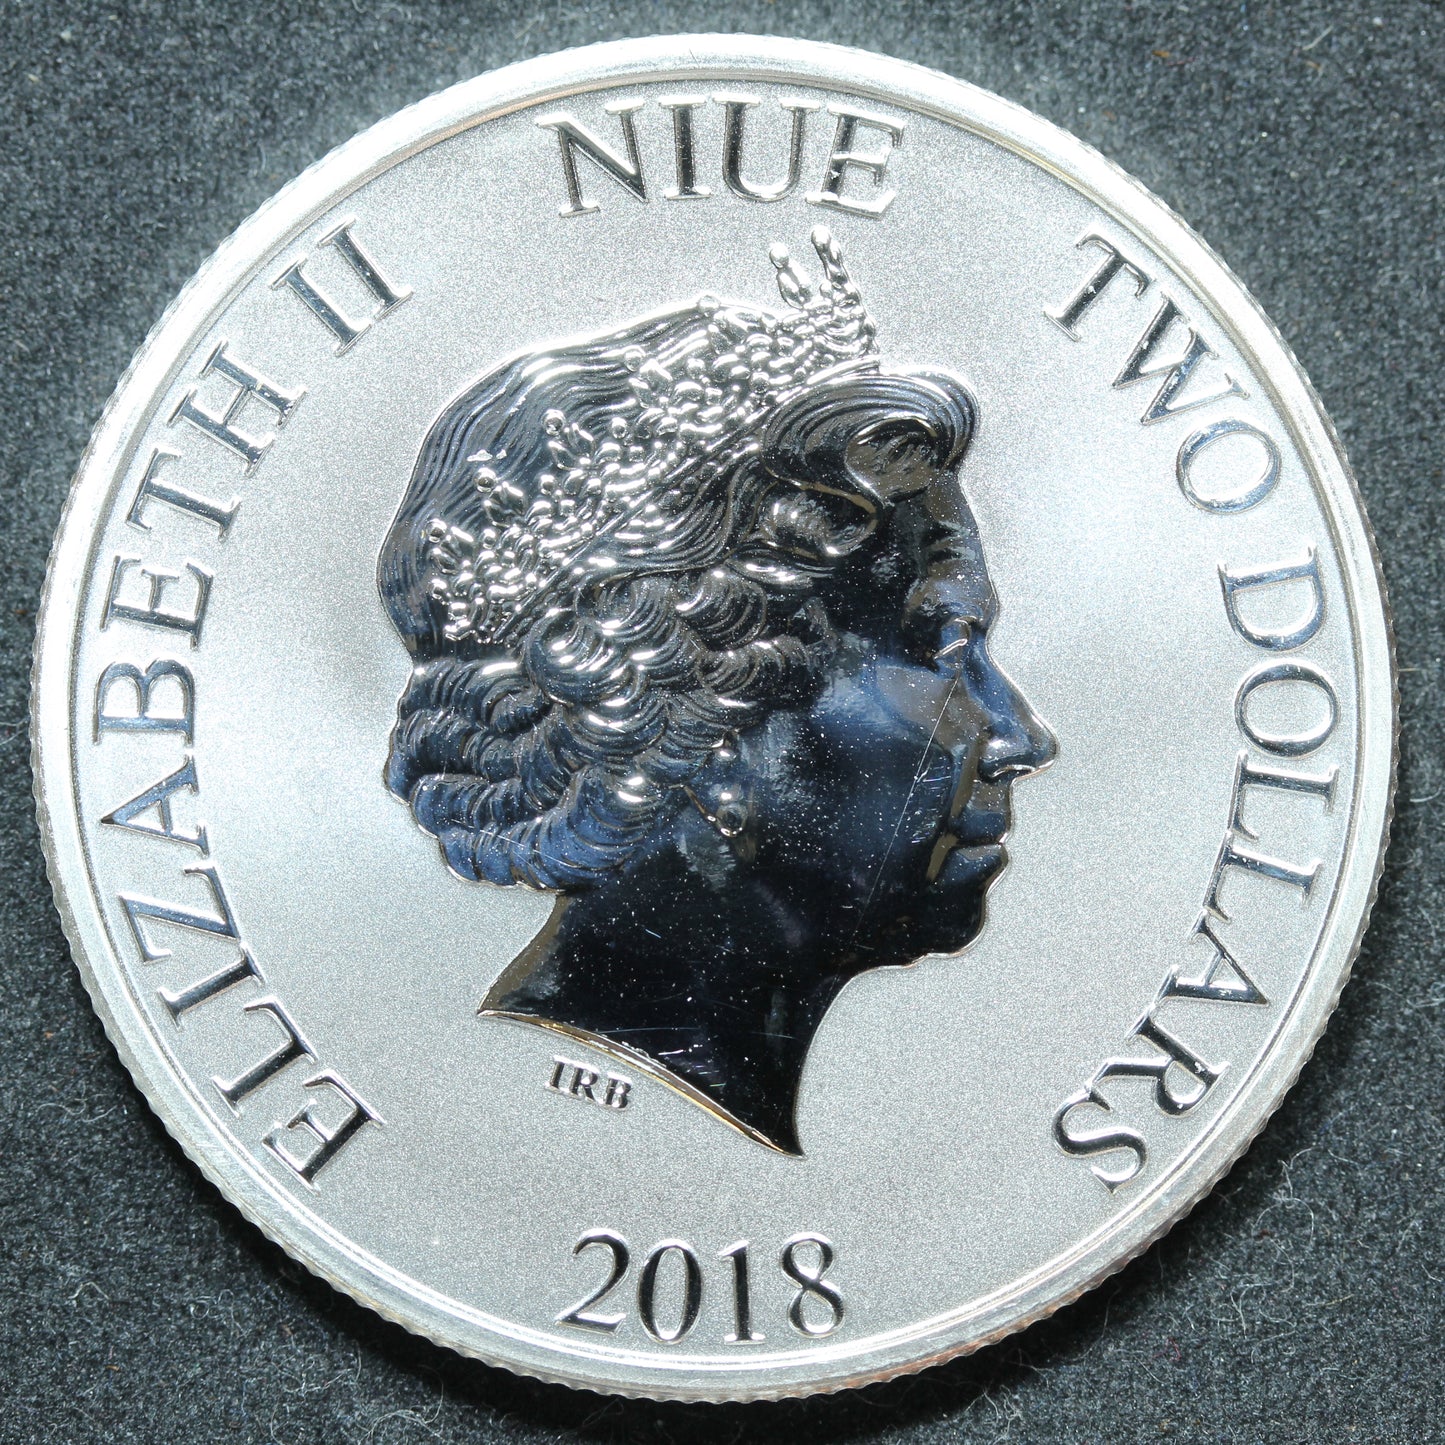 2018 Niue 1 oz Silver $2 Disney 90 Years of Imagination Coin w/ Capsule